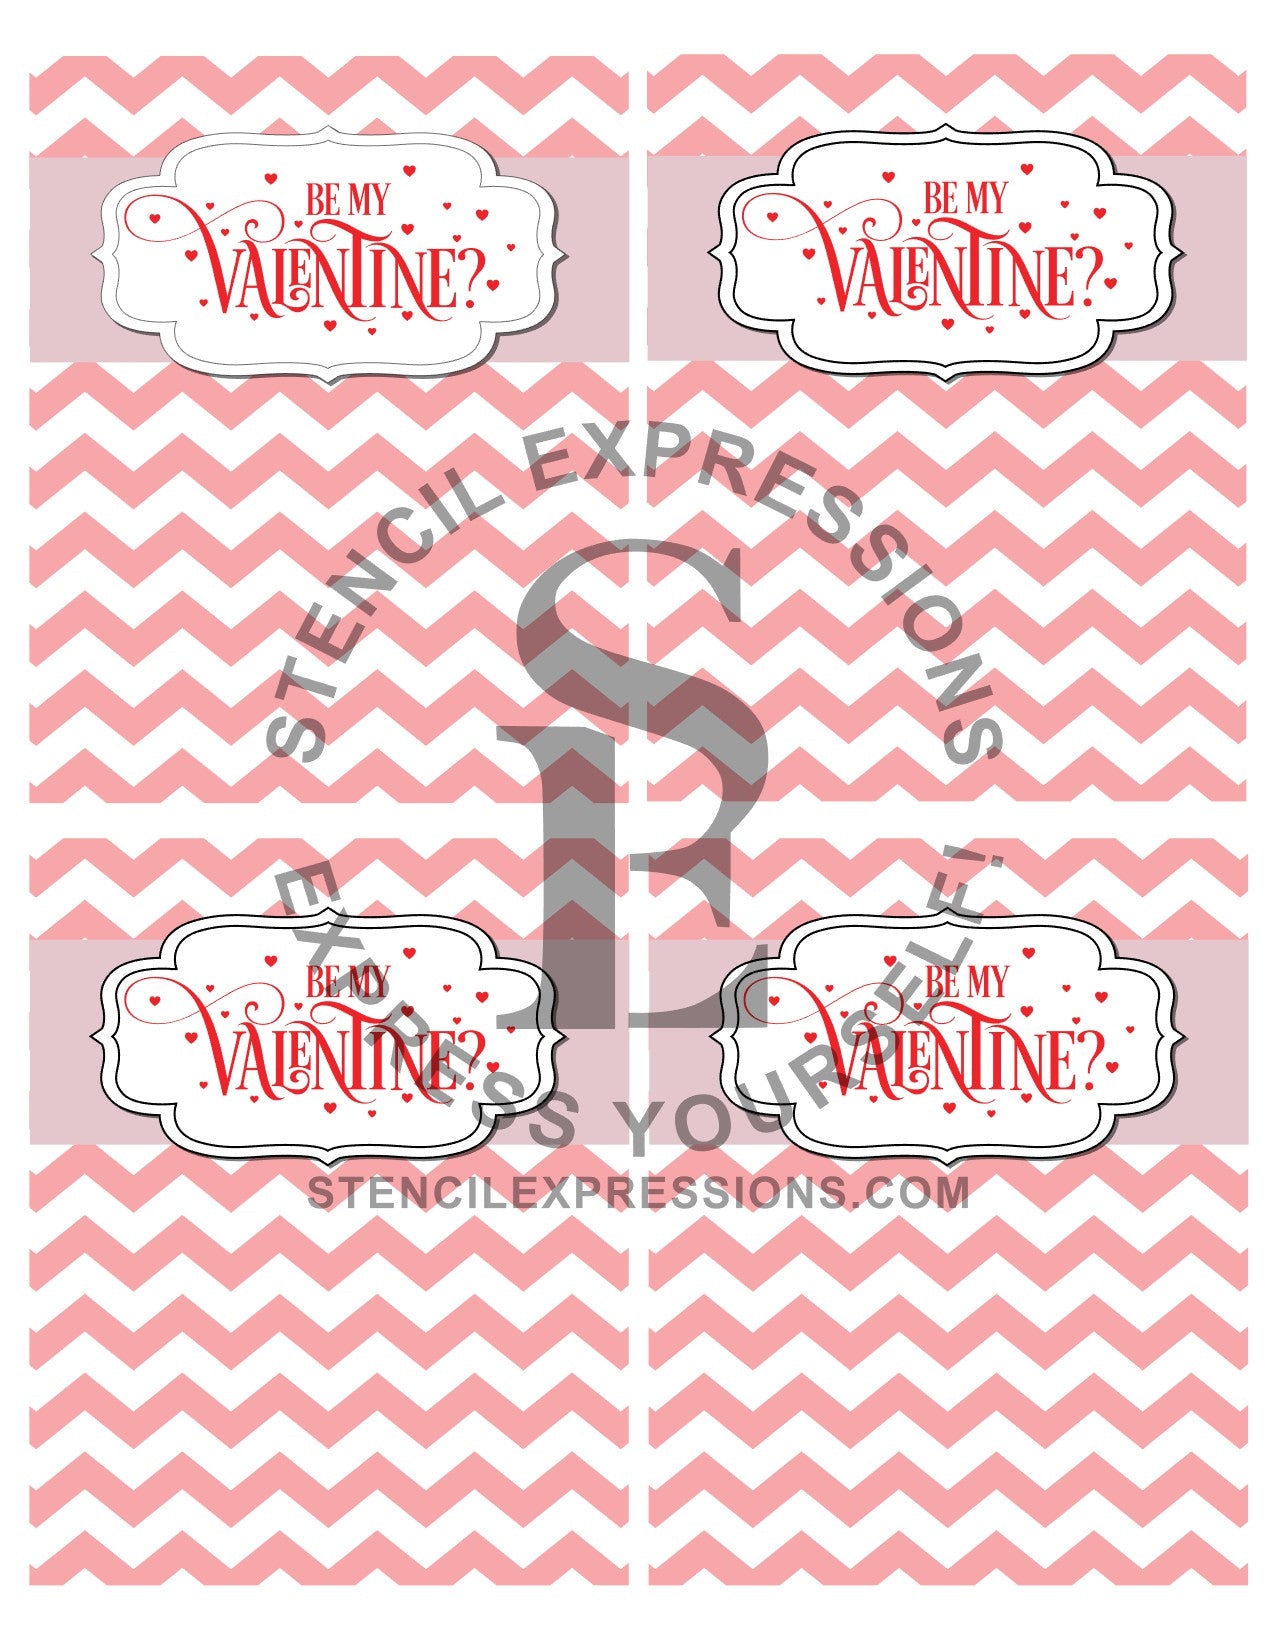 Happy Valentine's Day Chevron Cookie Packaging Card Digital Design Print Your Own Packaging *